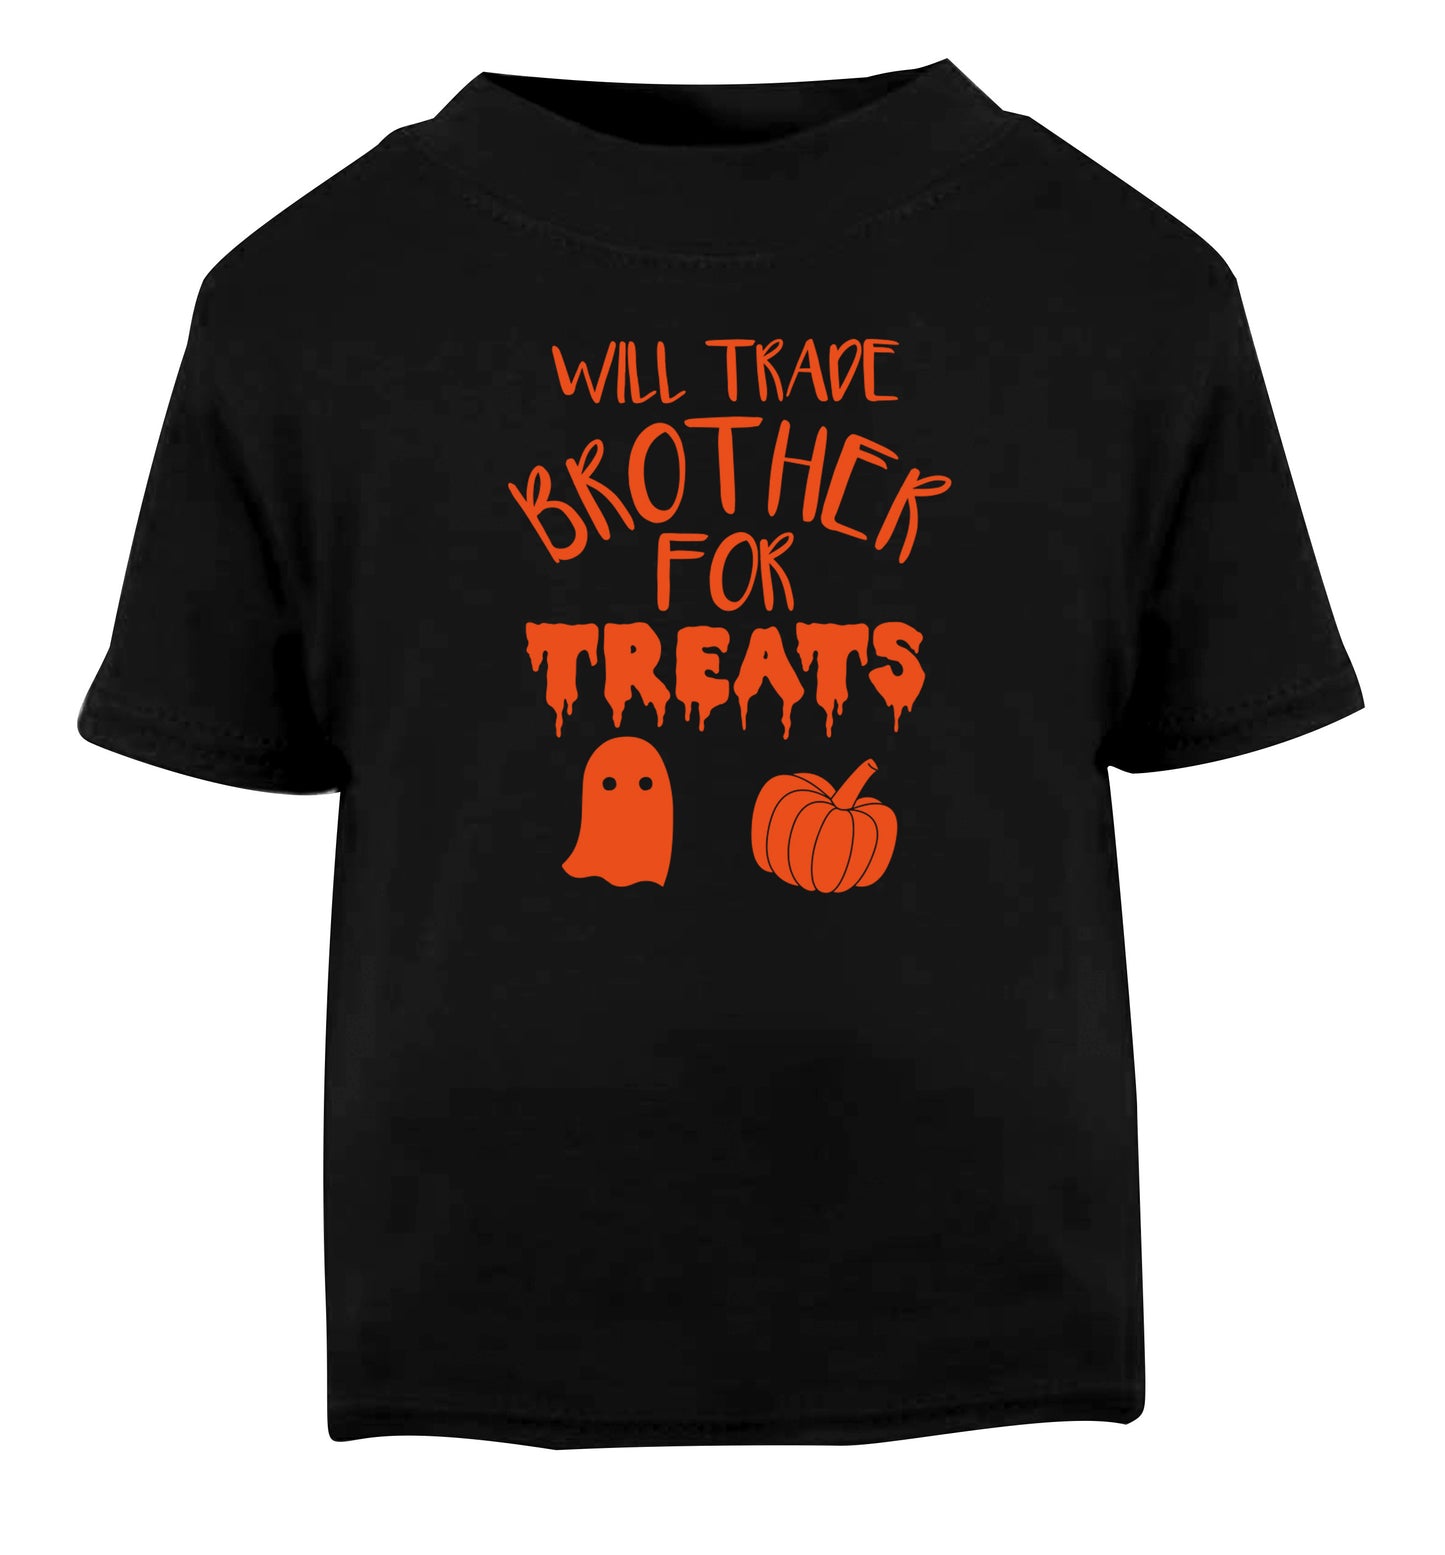 Will trade brother for treats Black Baby Toddler Tshirt 2 years